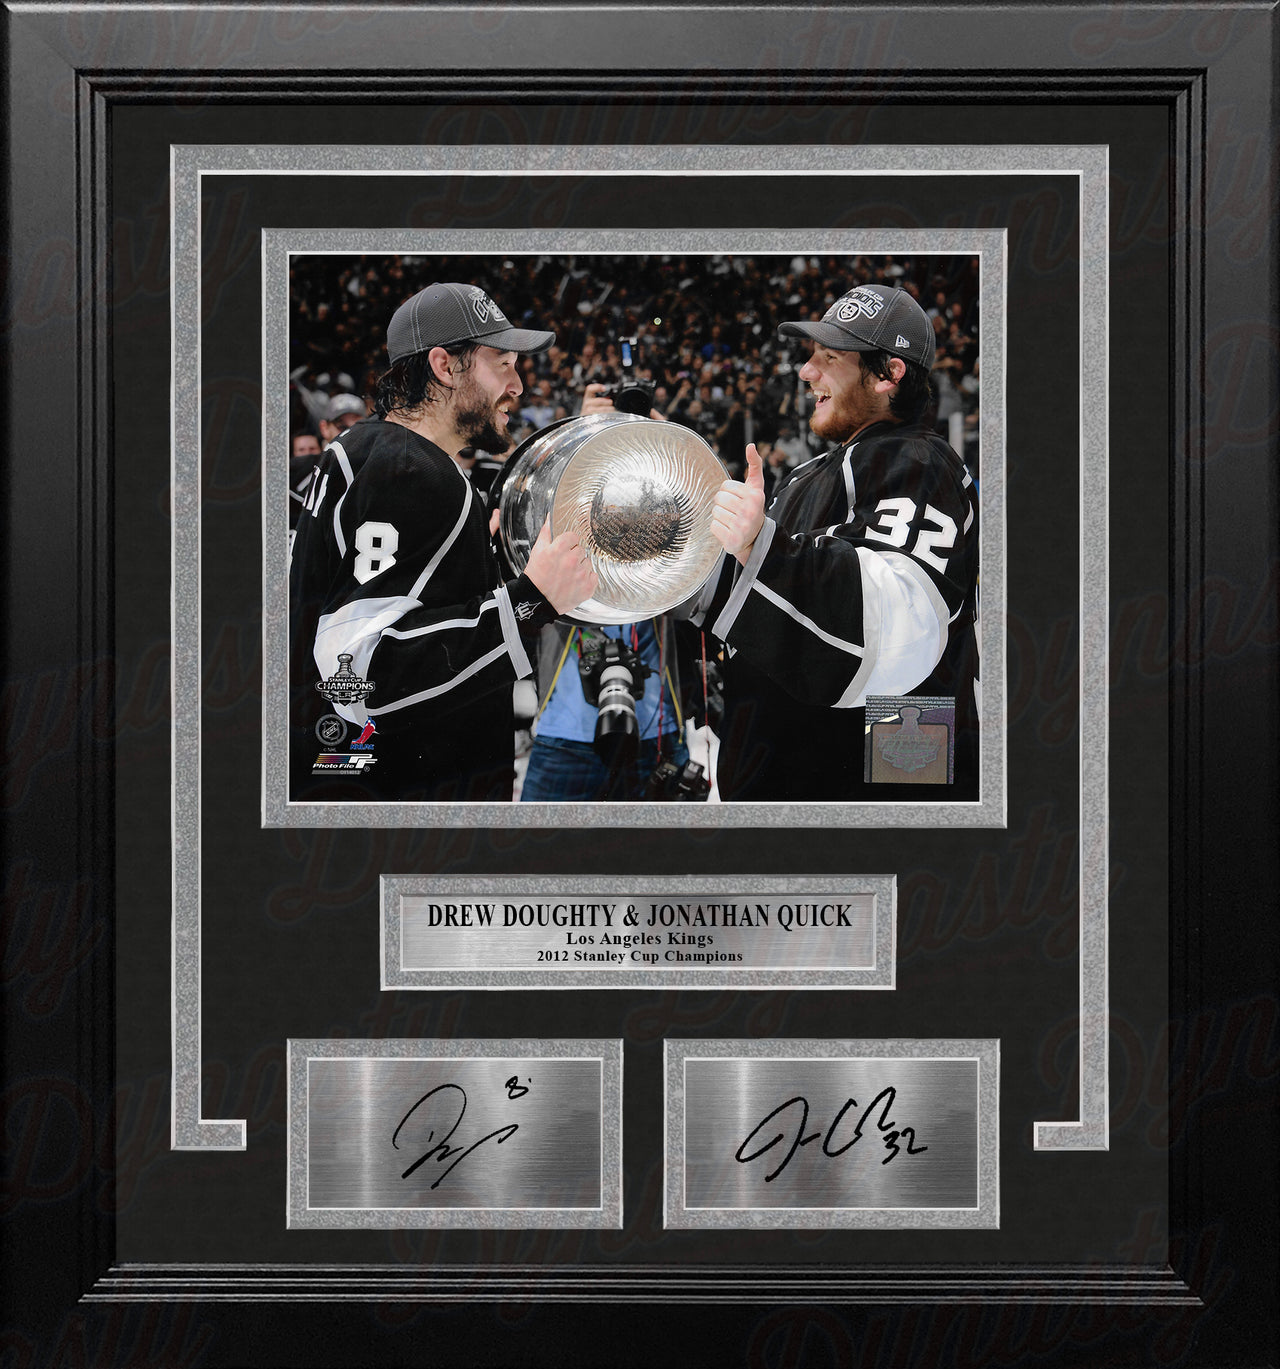 Drew Doughty & Jonathan Quick 2012 Stanley Cup LA Kings 8x10 Framed Photo with Engraved Autographs